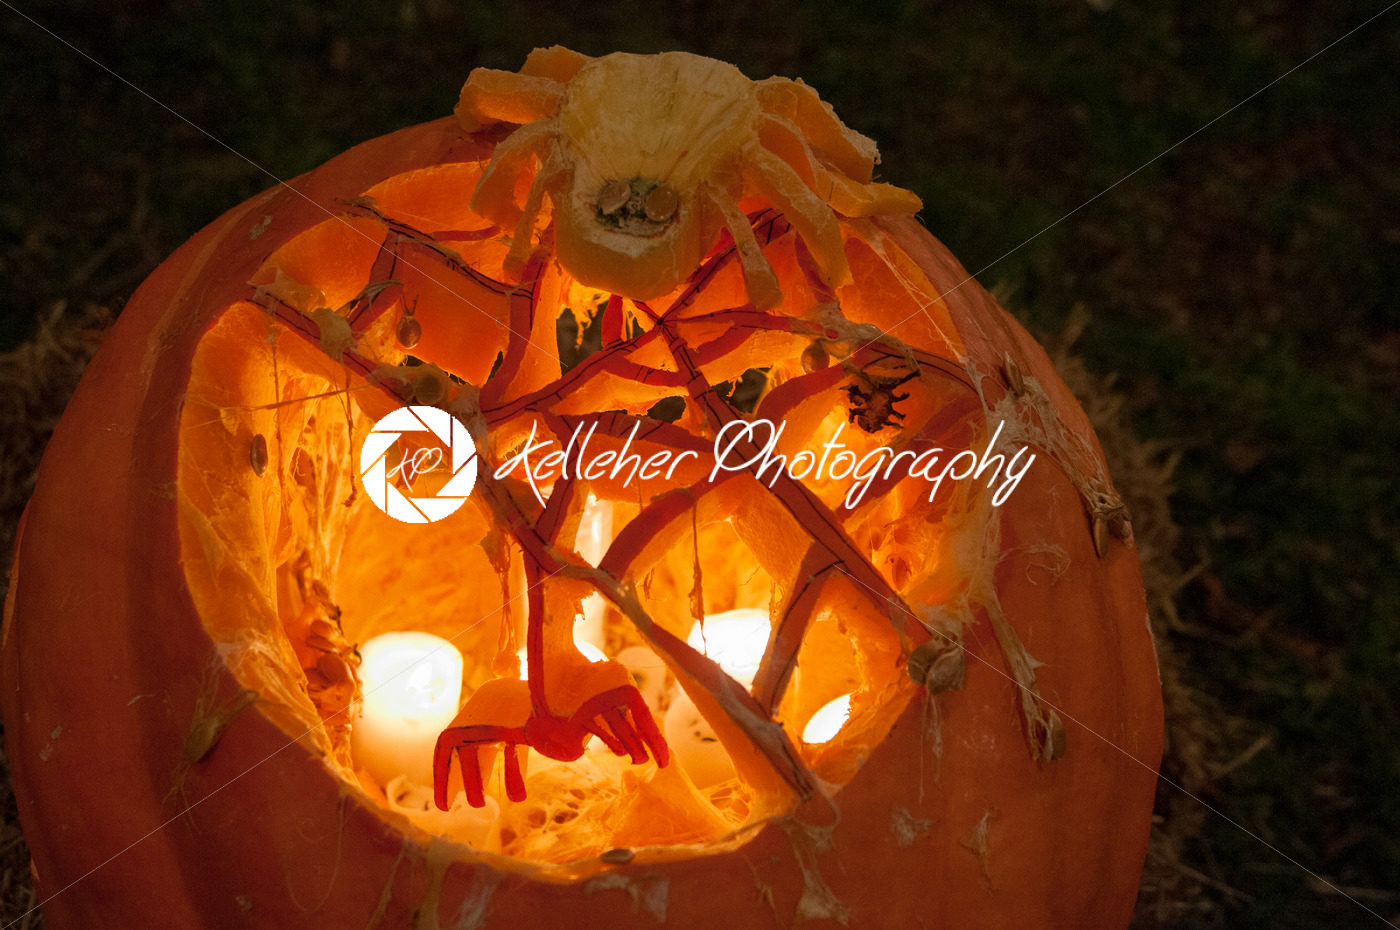 CHADDS FORD, PA – OCTOBER 26: Spider Pumpkin at The Great Pumpkin Carve carving contest on October 26, 2013 - Kelleher Photography Store